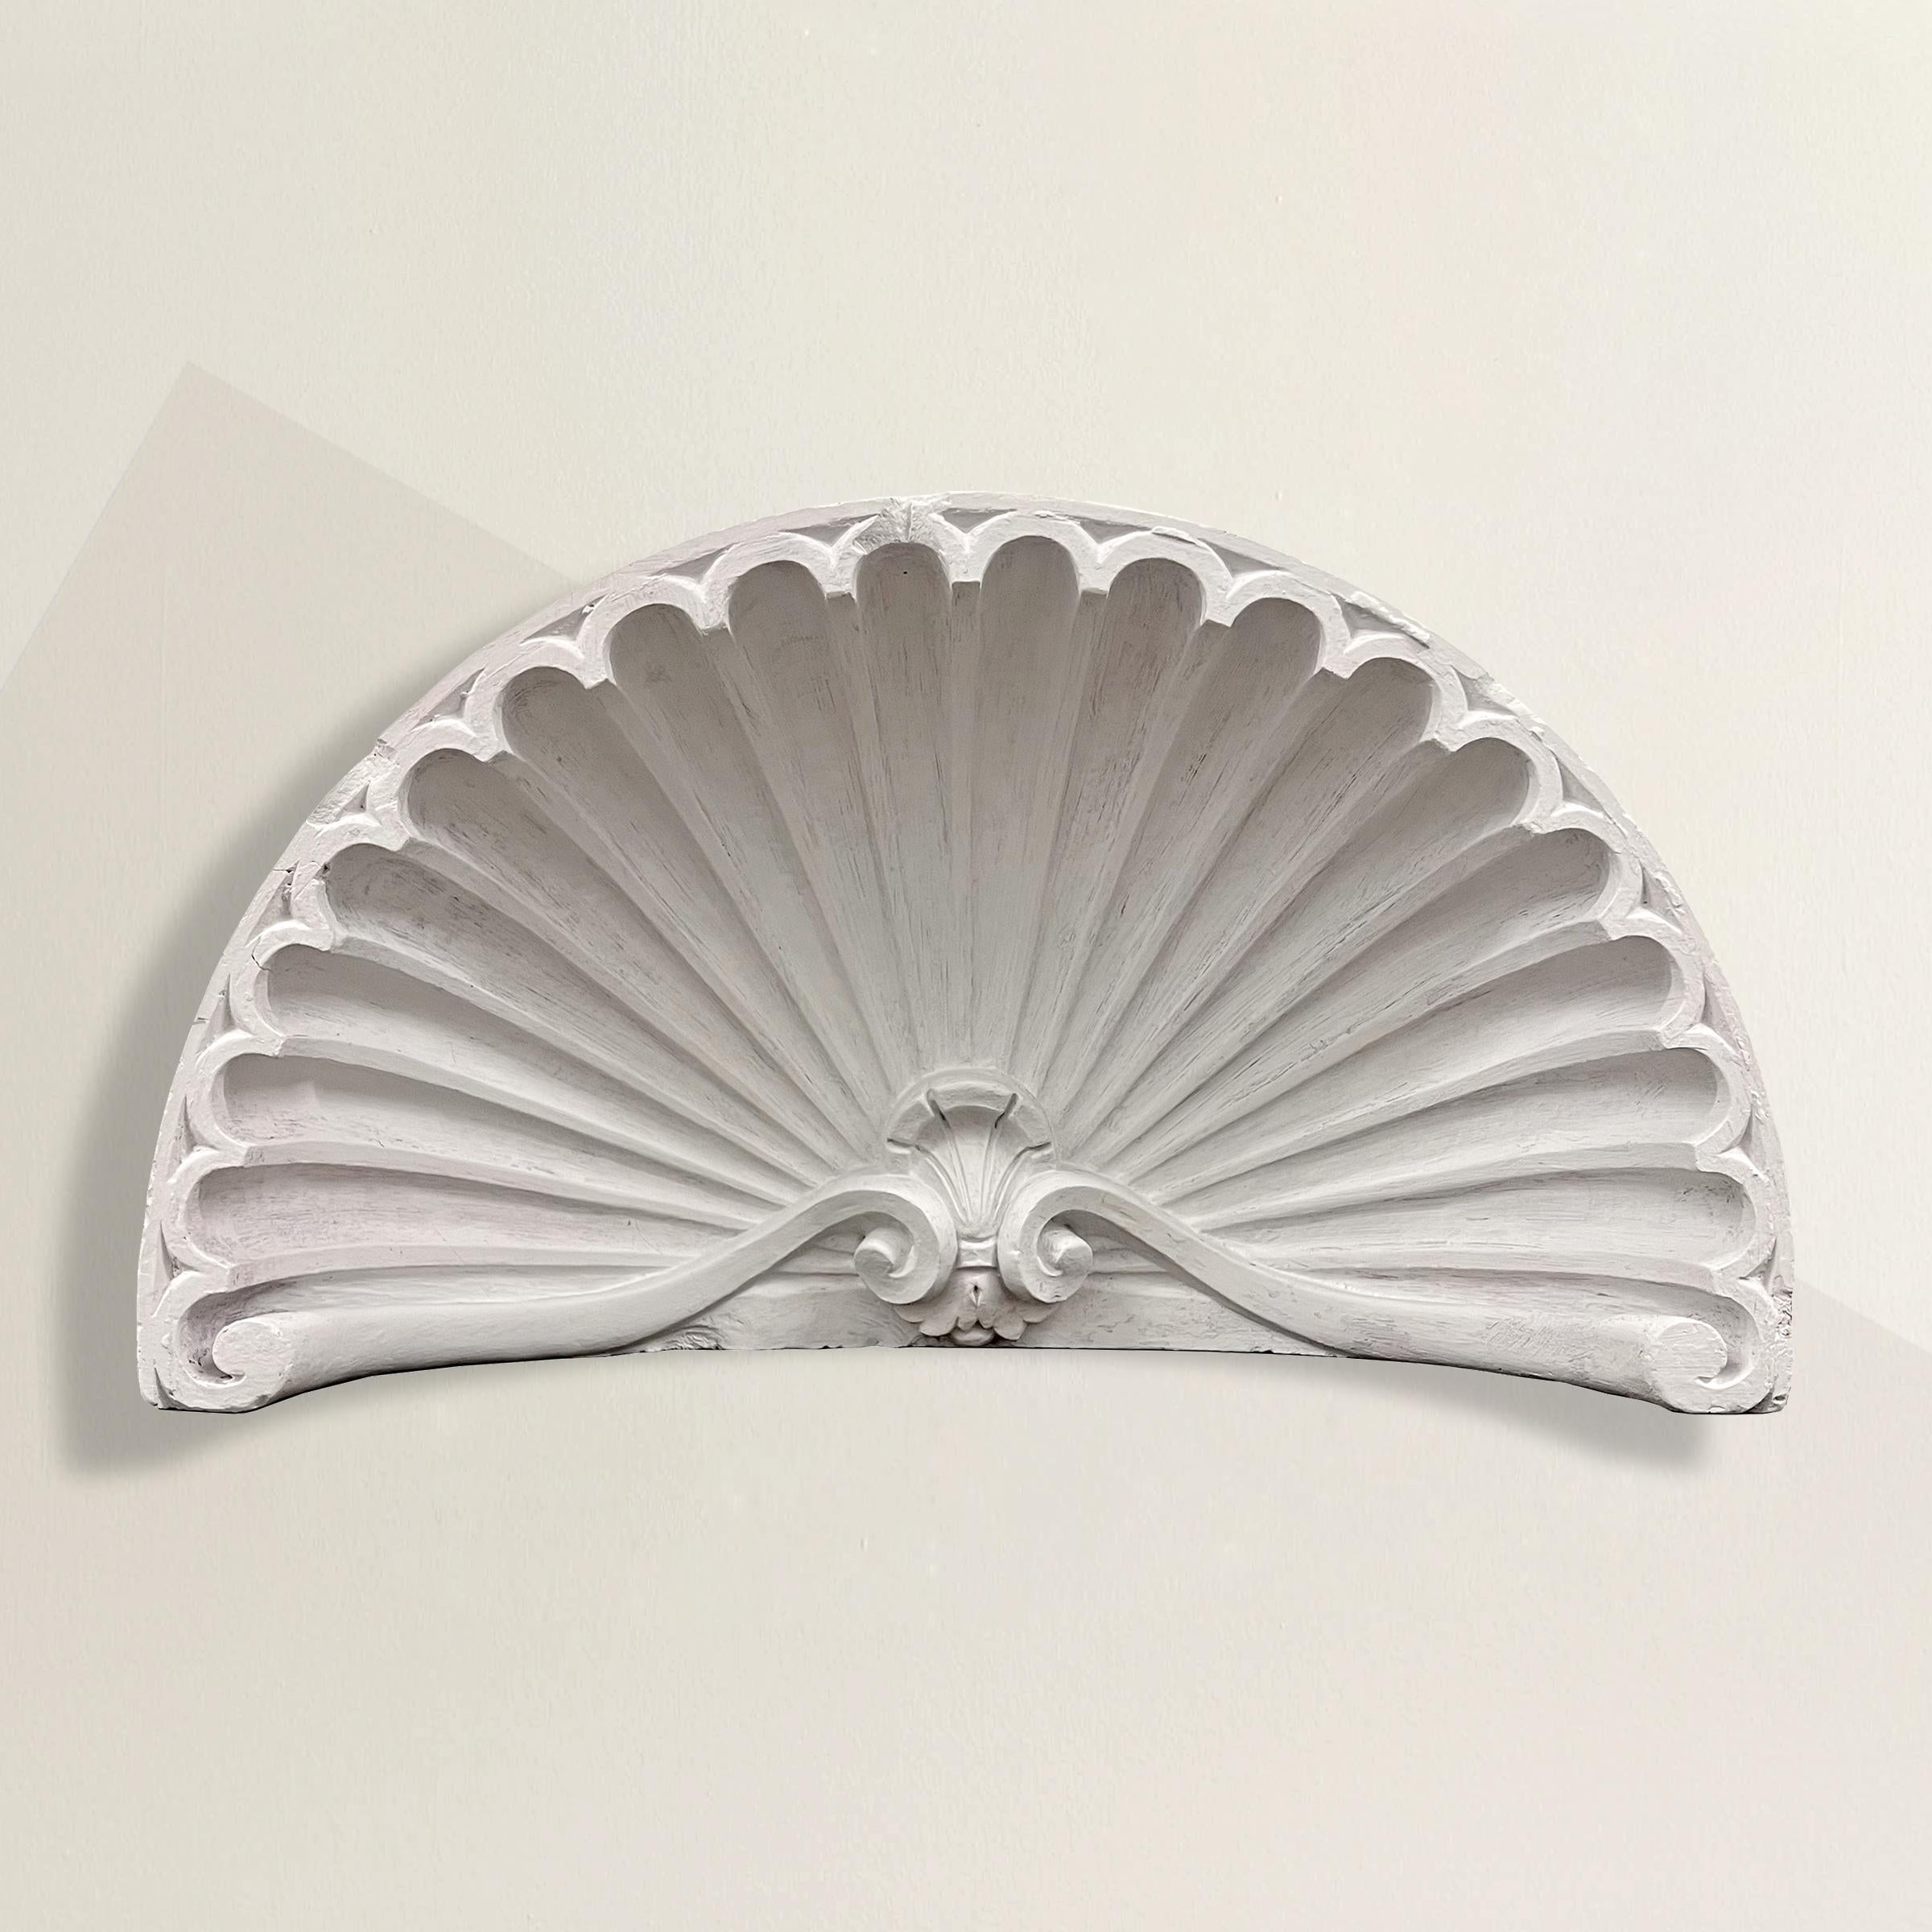 A striking pair of 19th century American plaster shell-form niche or door caps. These architectural fragments were originally mounted above niches or doors, and completed the classical architectural continuity of a room. Today, they're wonderful